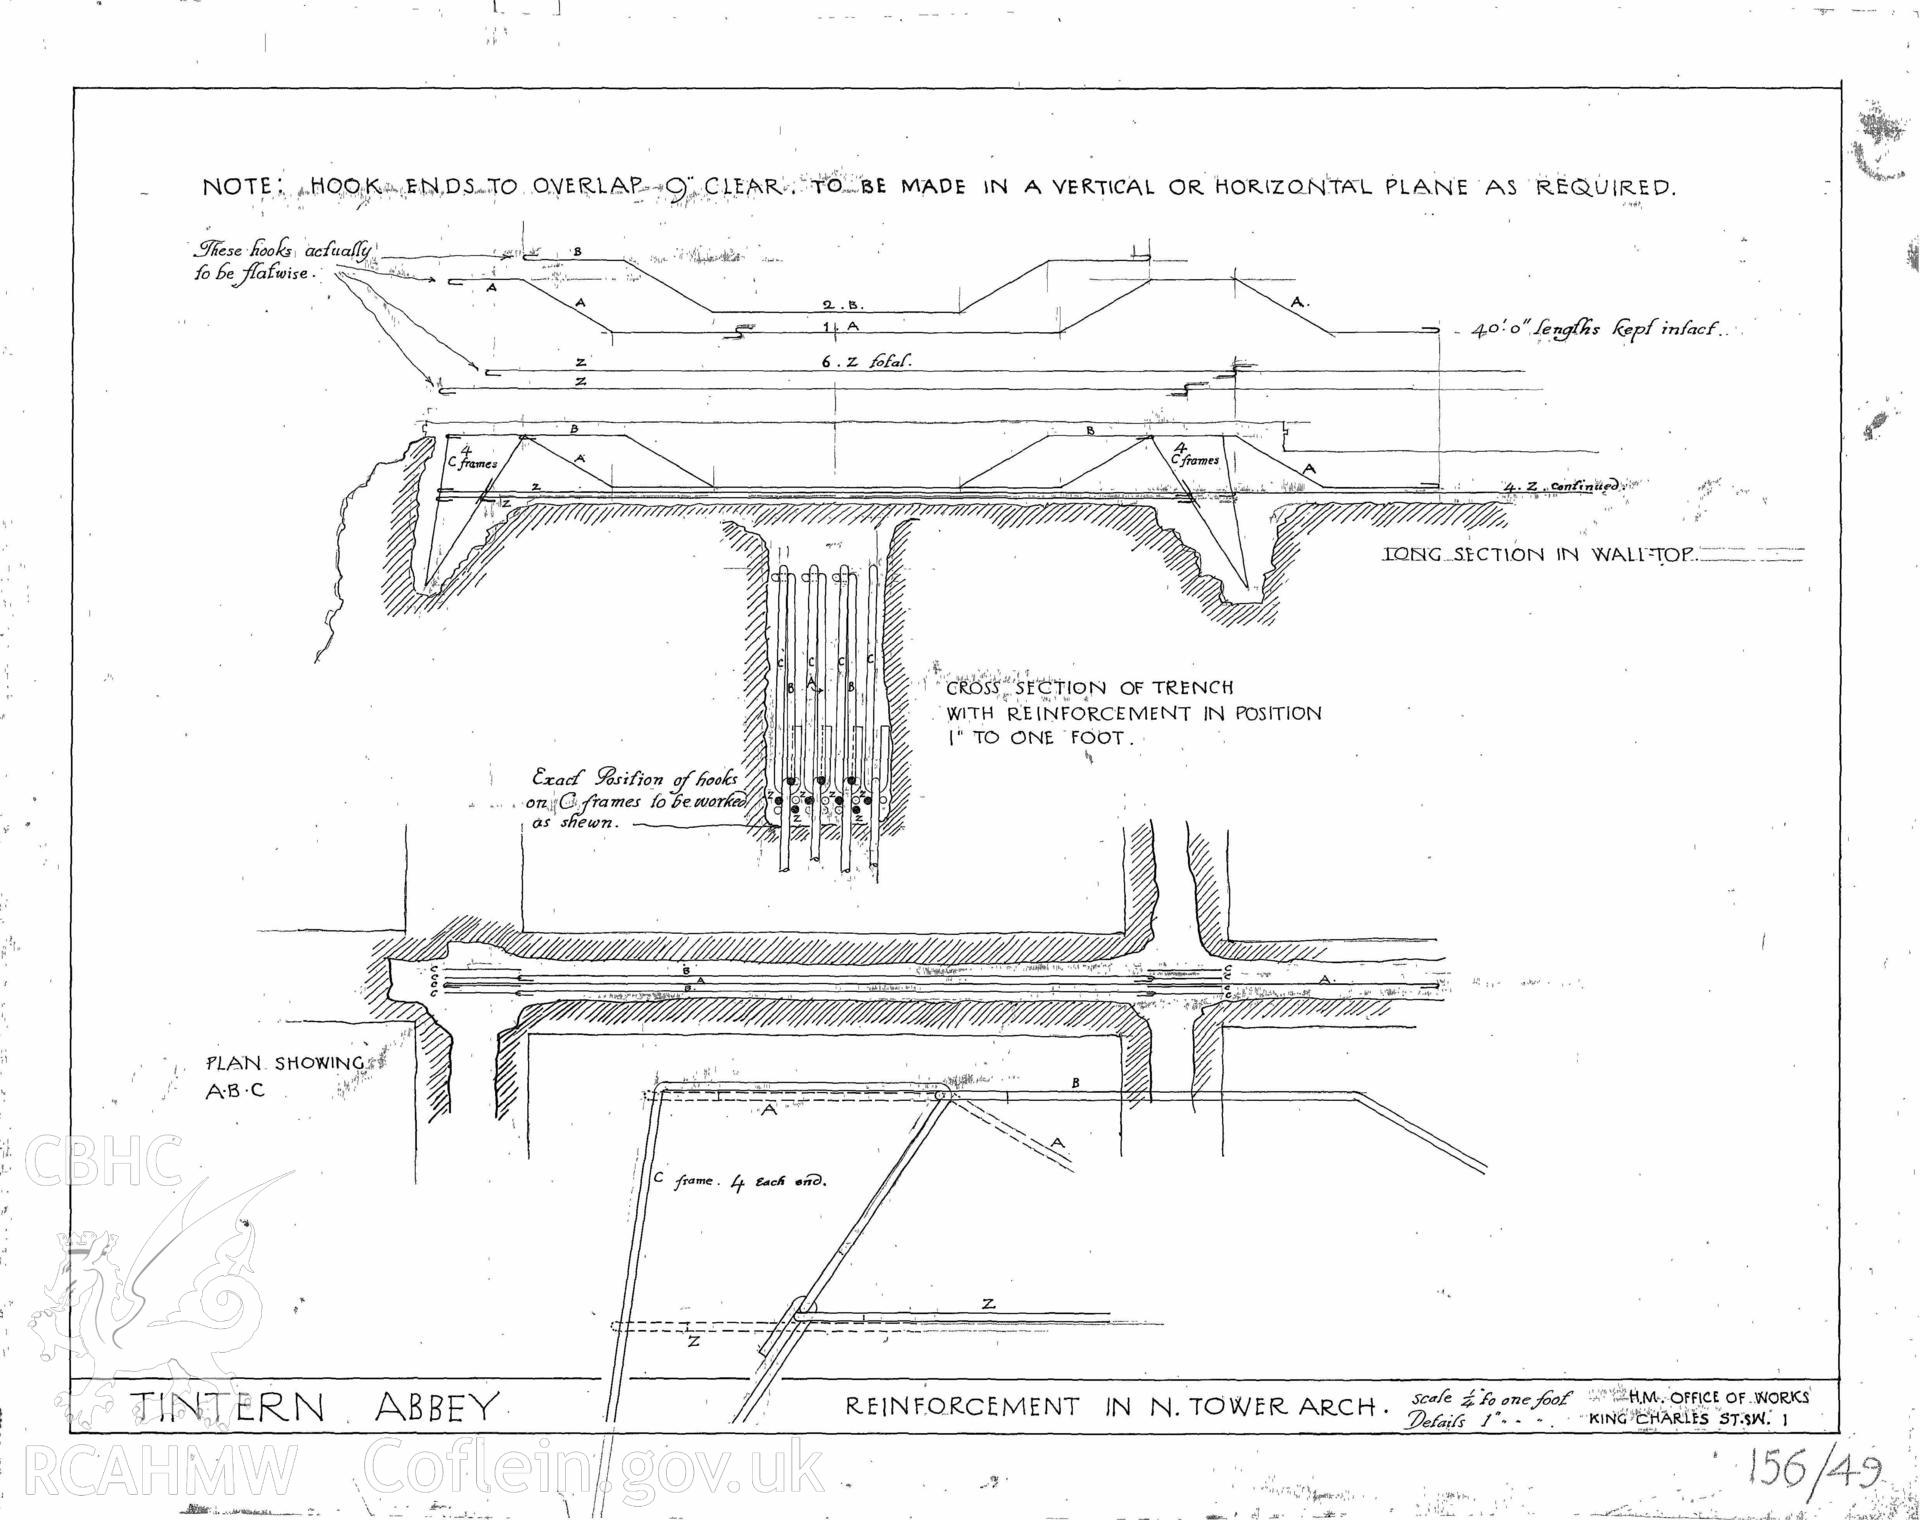 Cadw guardianship monument drawing of Tintern Abbey. Reinforcement in N Tower Arch. Cadw ref. No. 156/49. Scale 1:48.